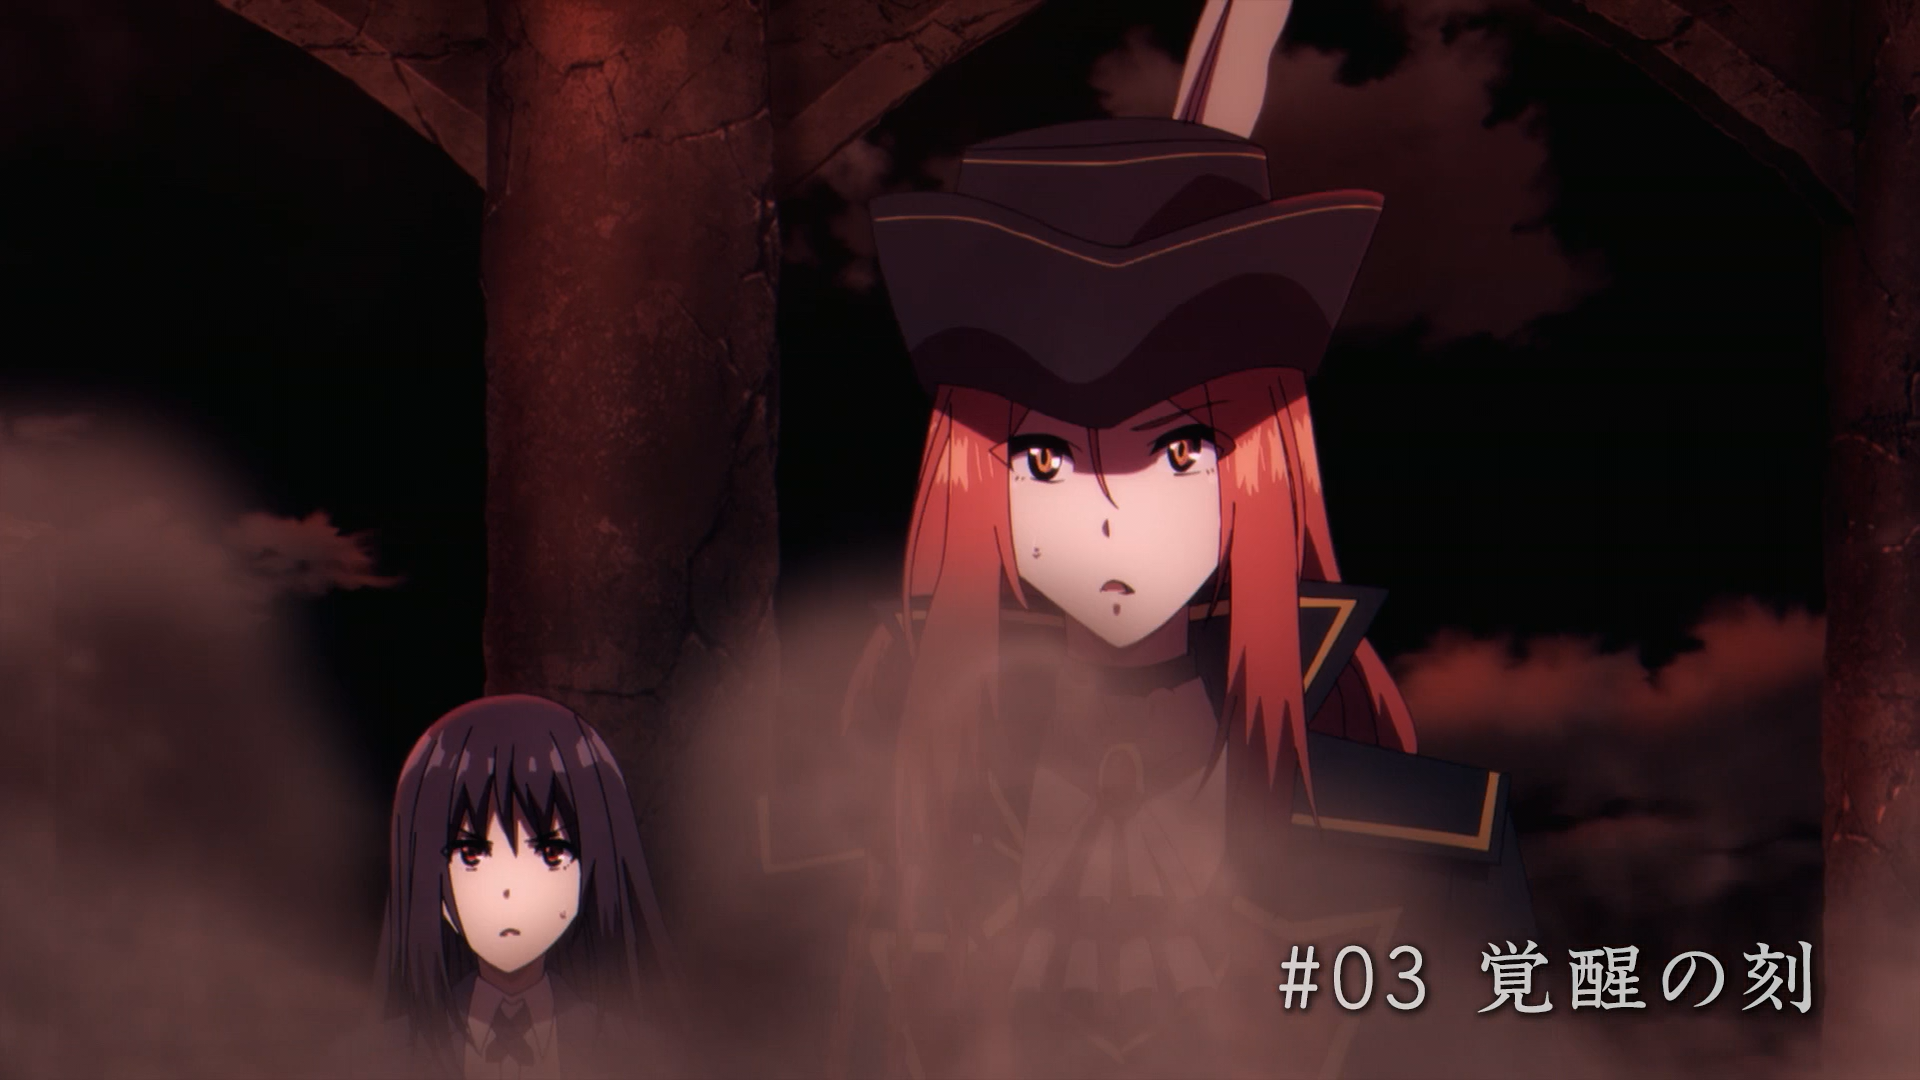 The Eminence in Shadow Episode 5 Preview Released